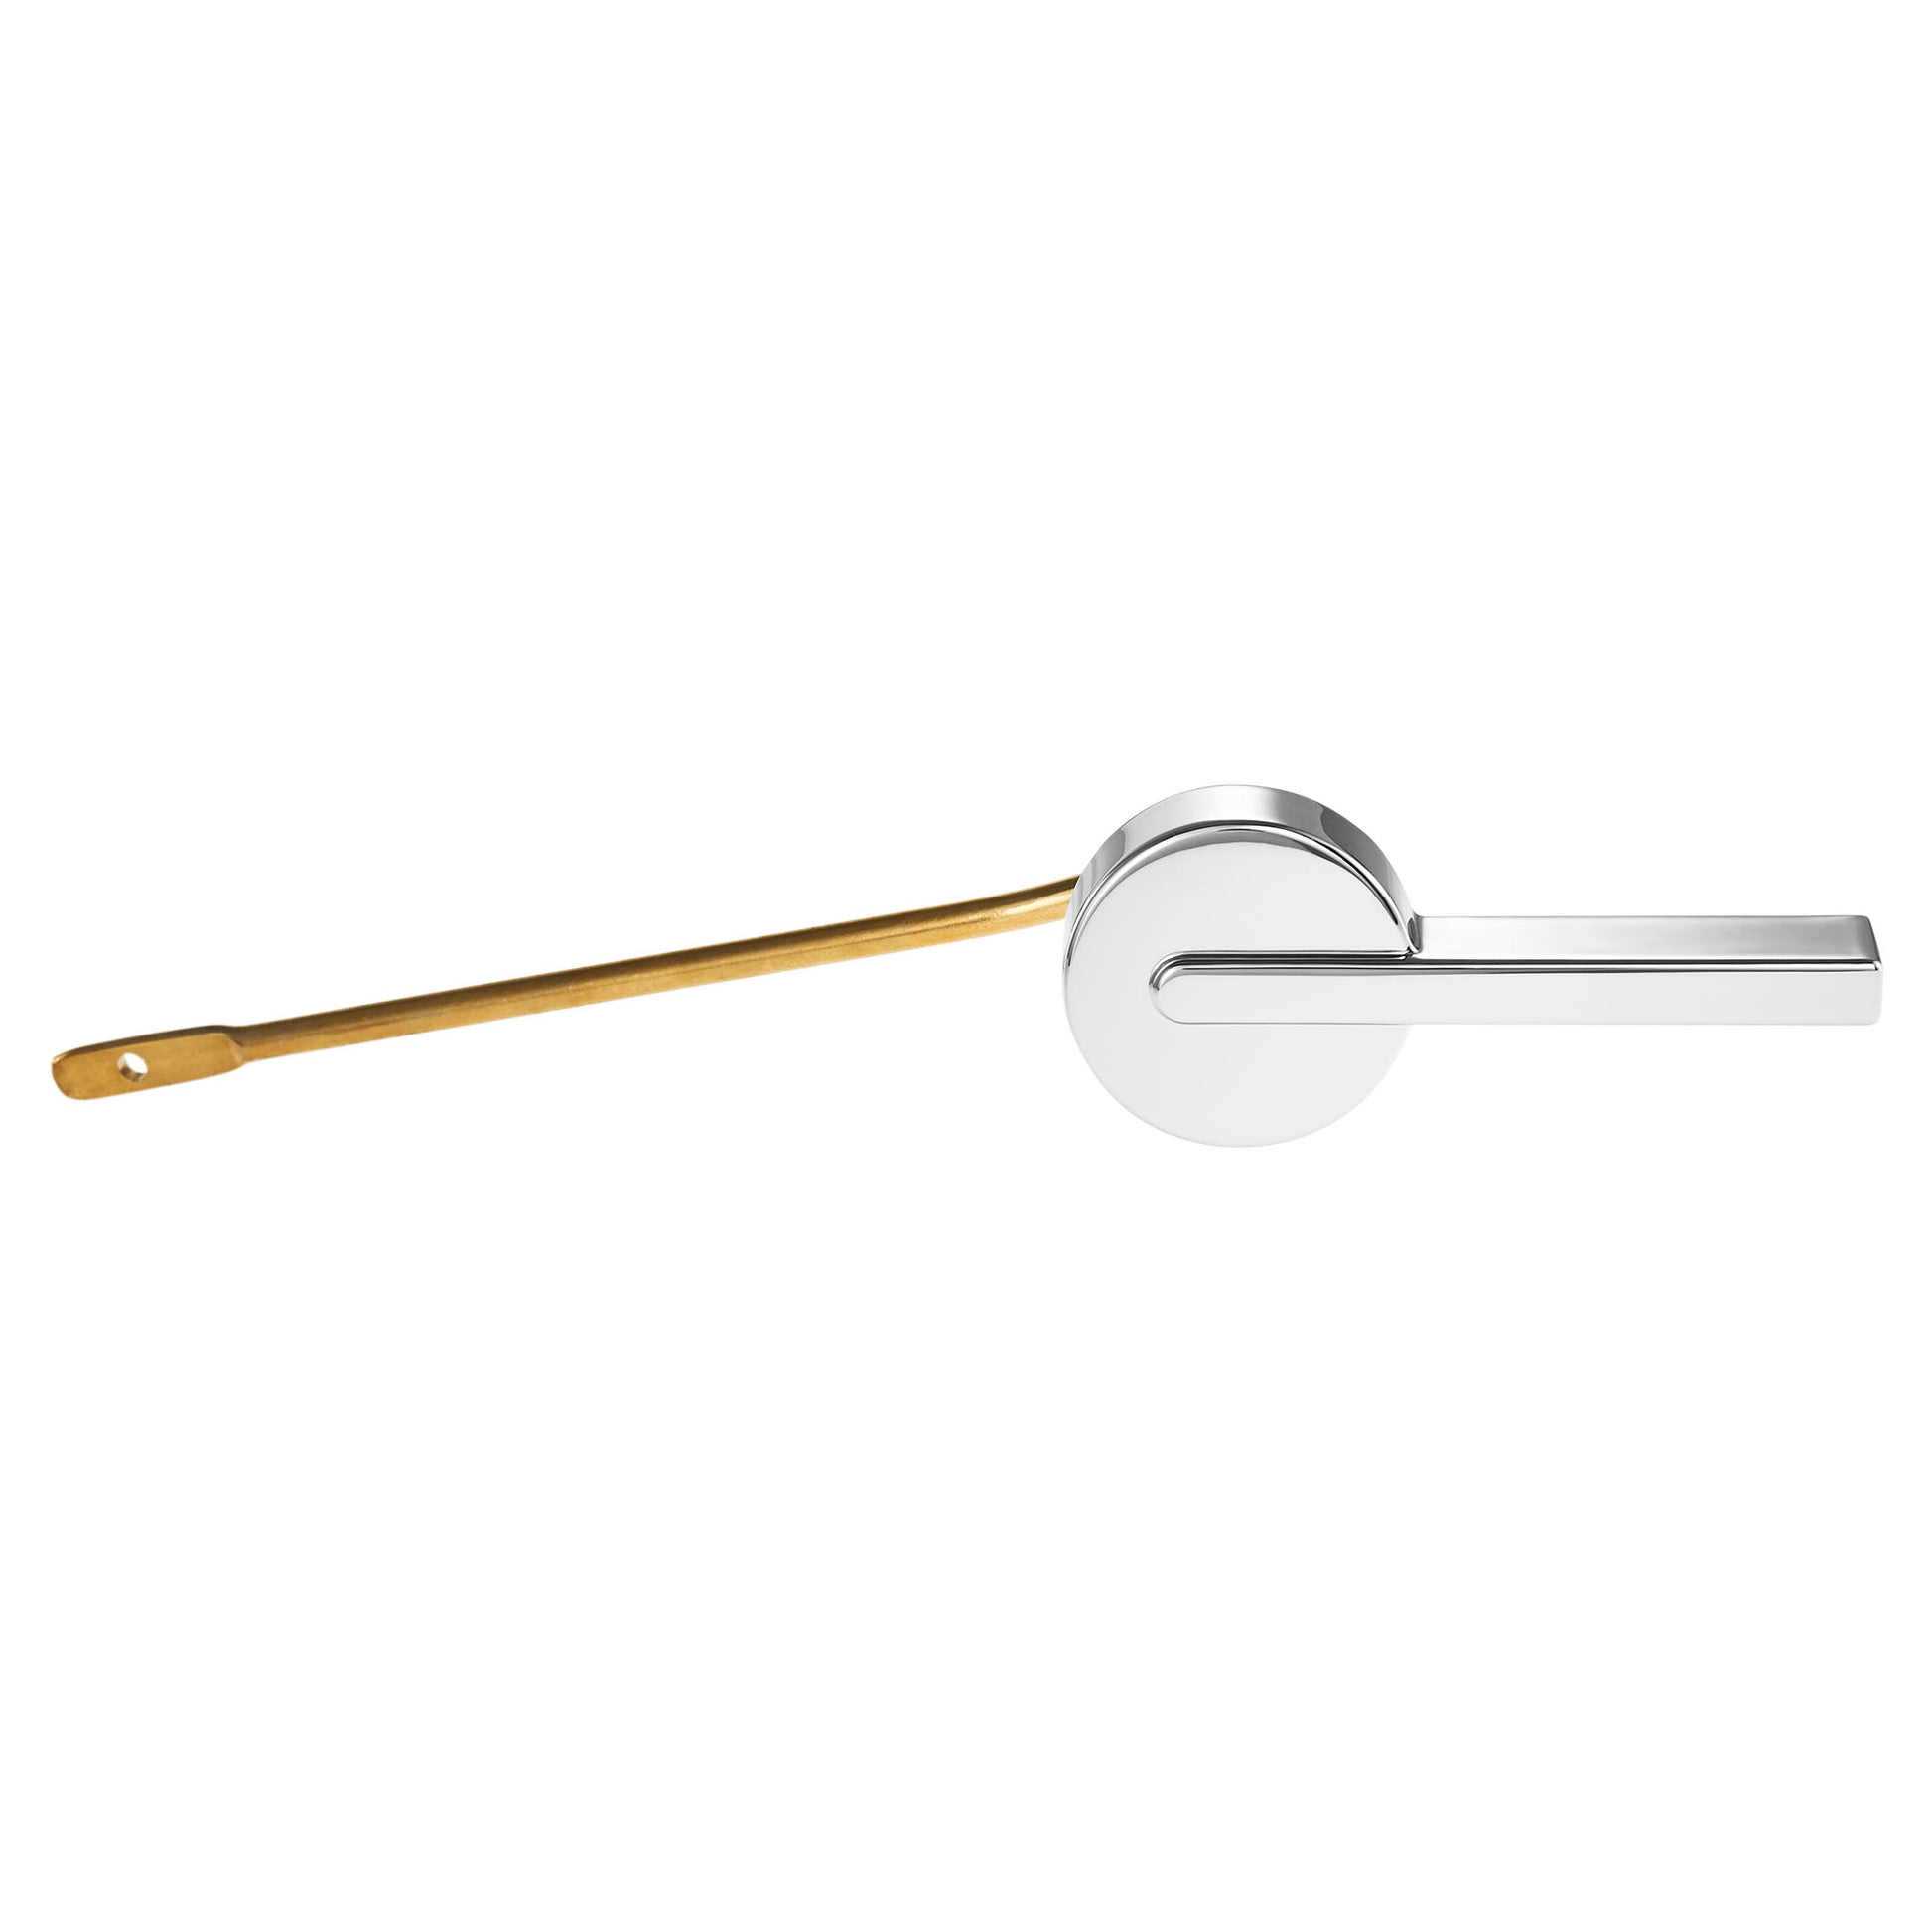  7381846-200.0020A, Right-Hand Trip Lever in Chrome